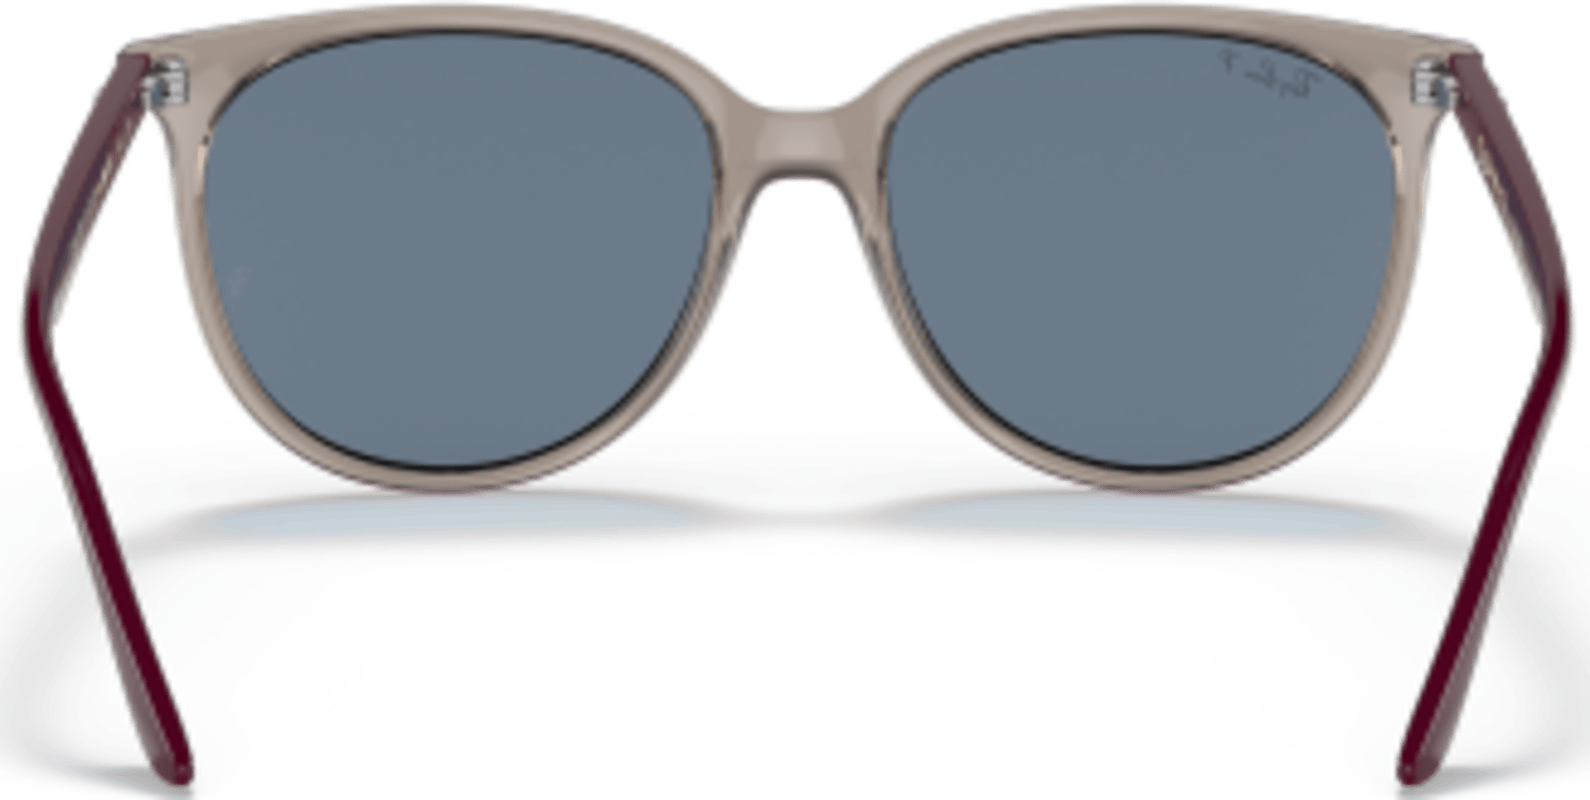 RB4378 Sunglasses in Transparent and Grey - RB4378